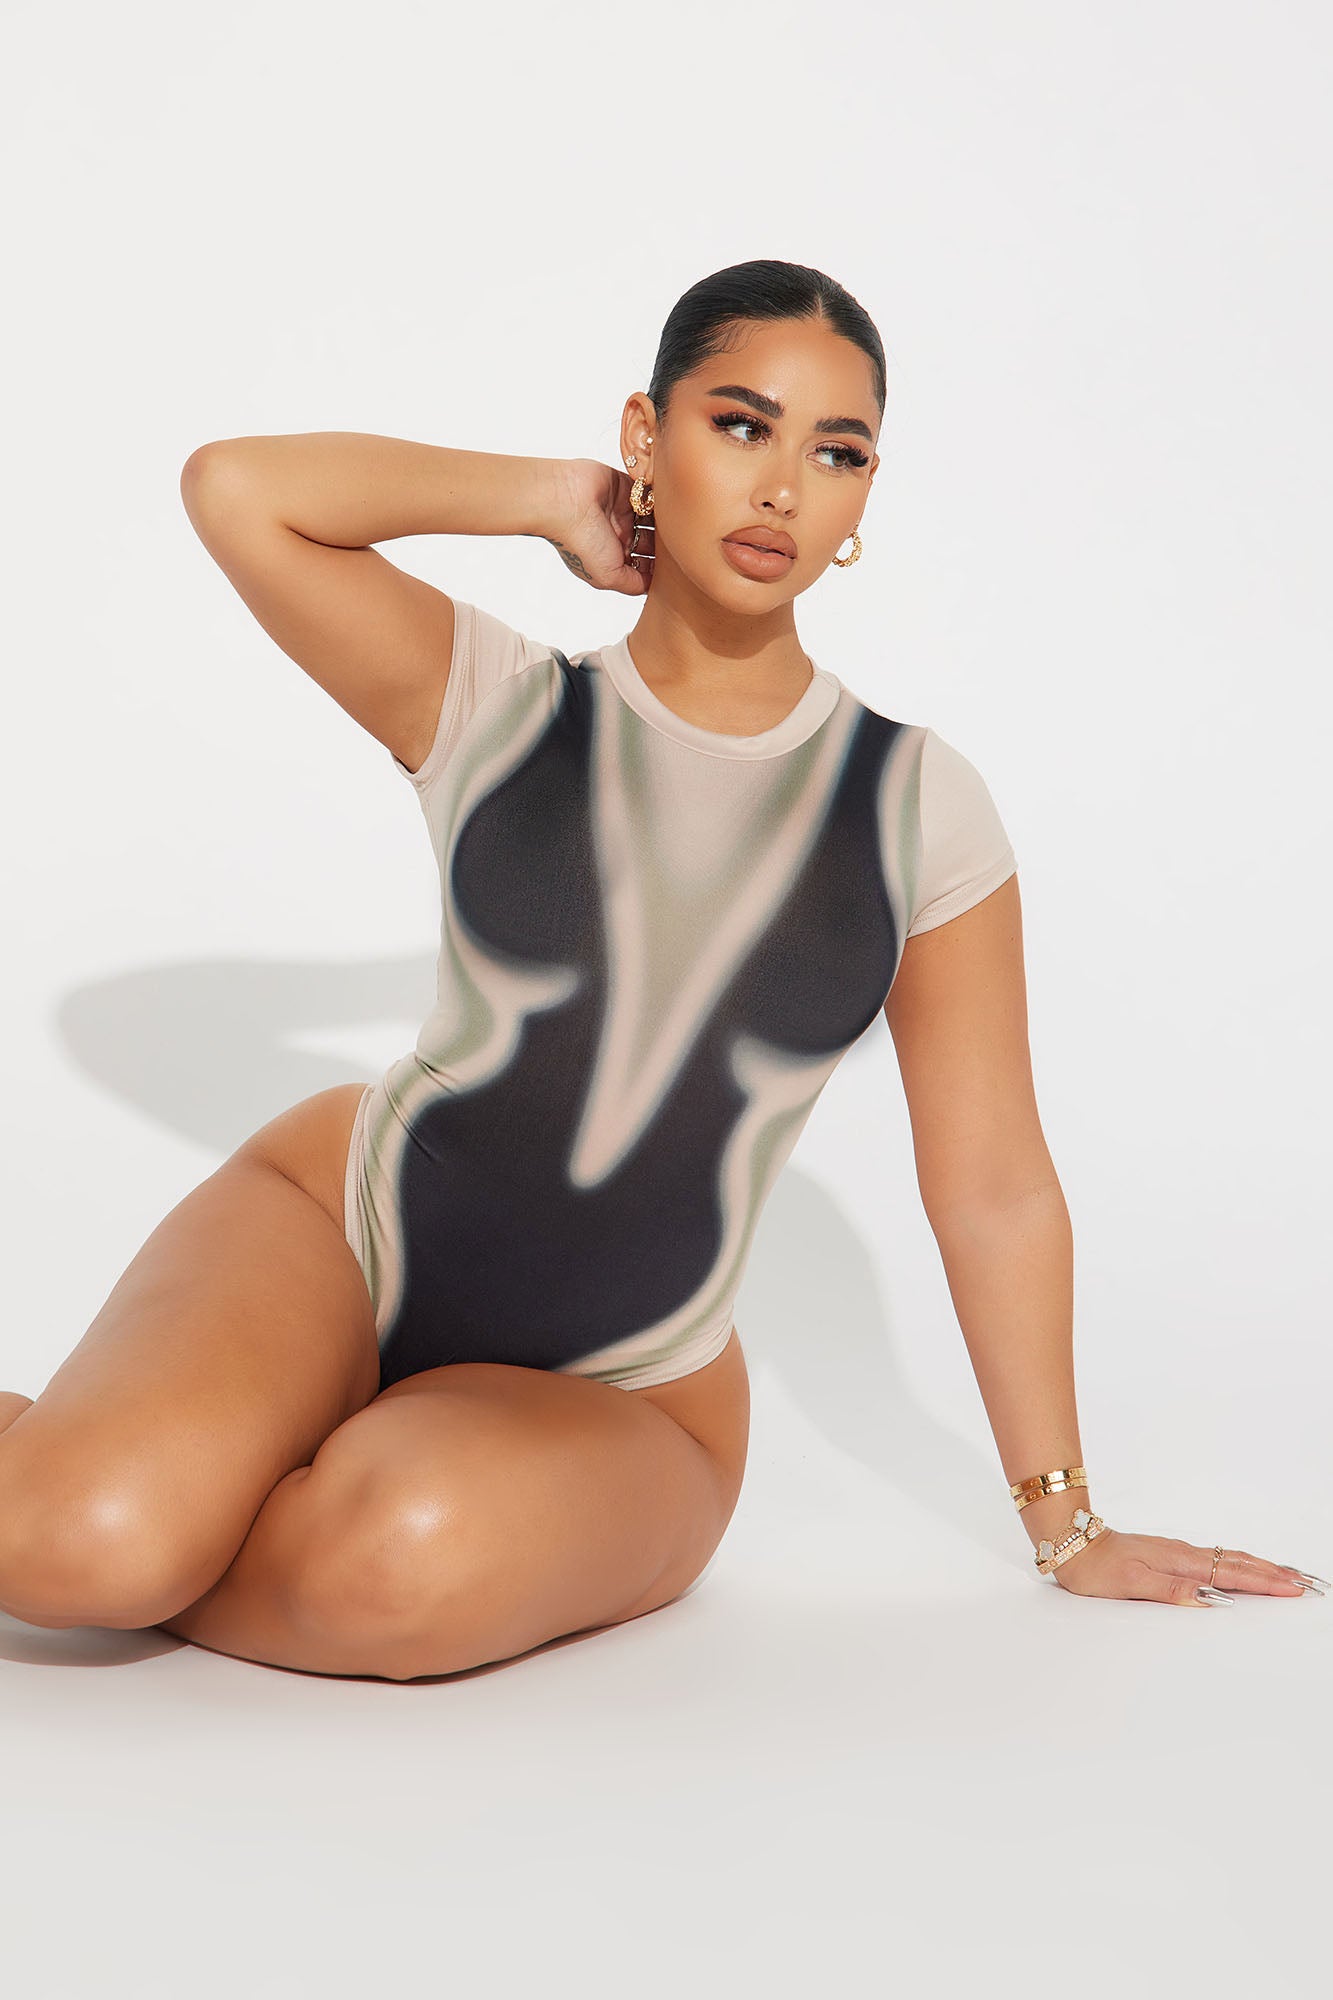 Out Of Body Experience Short Sleeve Bodysuit - Taupe/combo, Fashion Nova,  Bodysuits